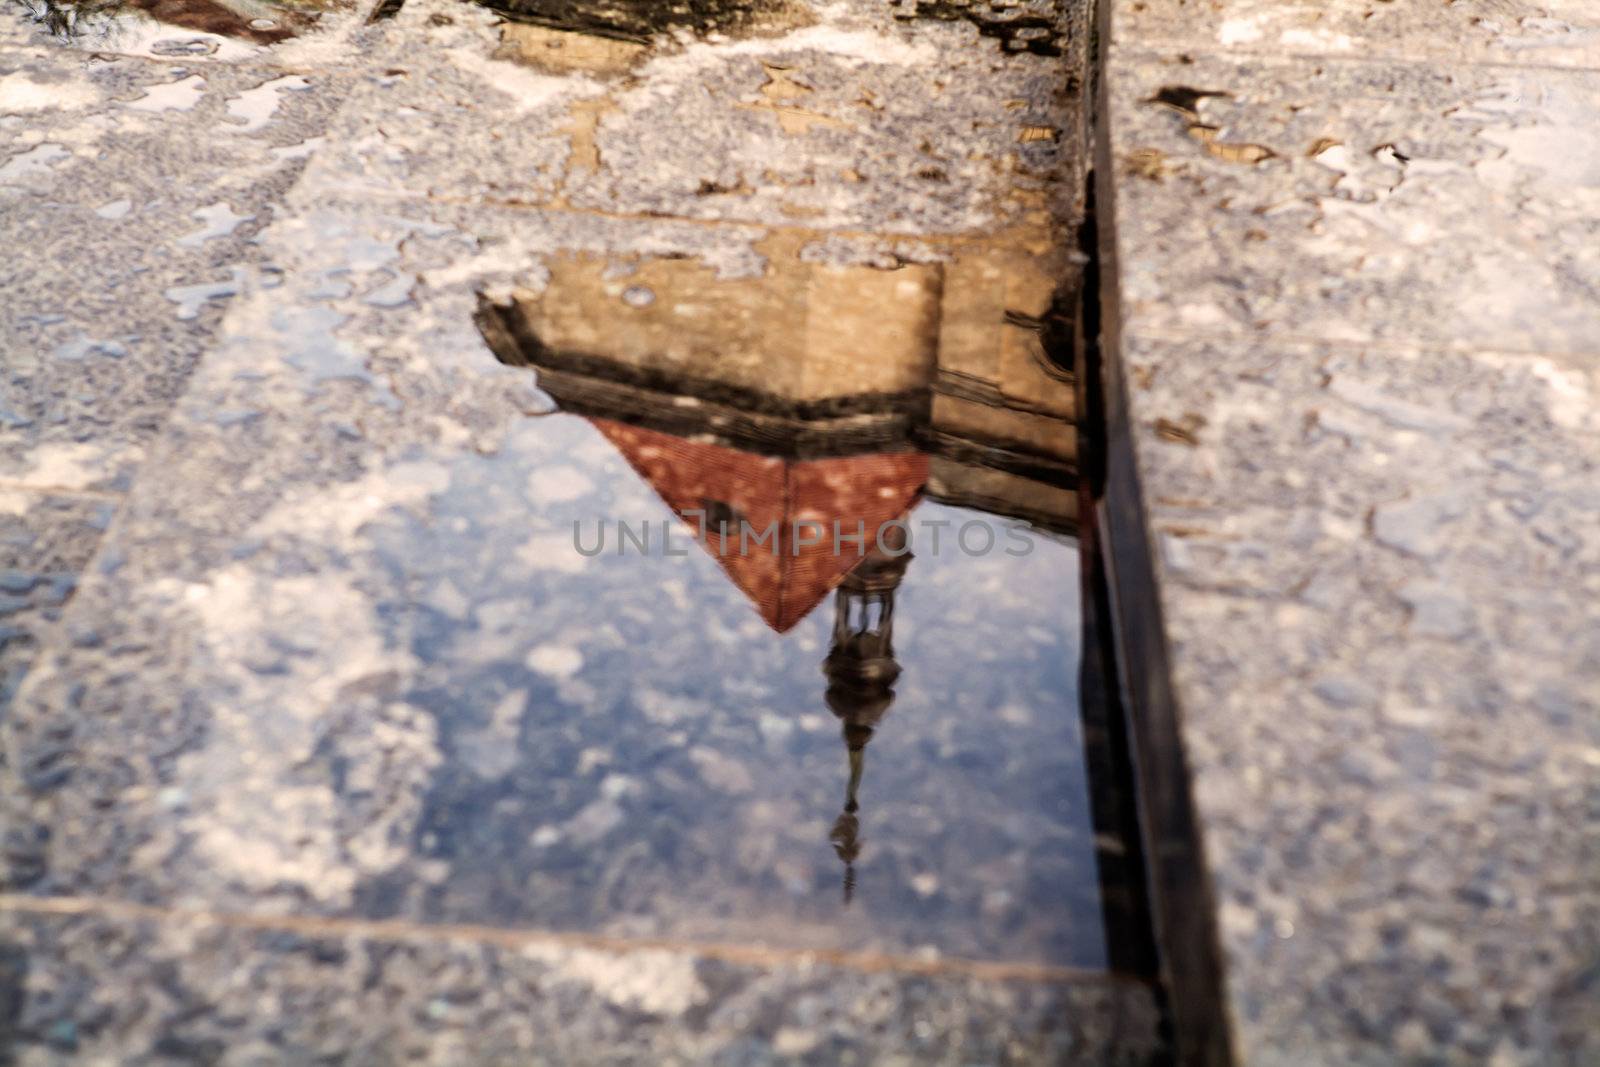 reflection of building in puddle by catolla